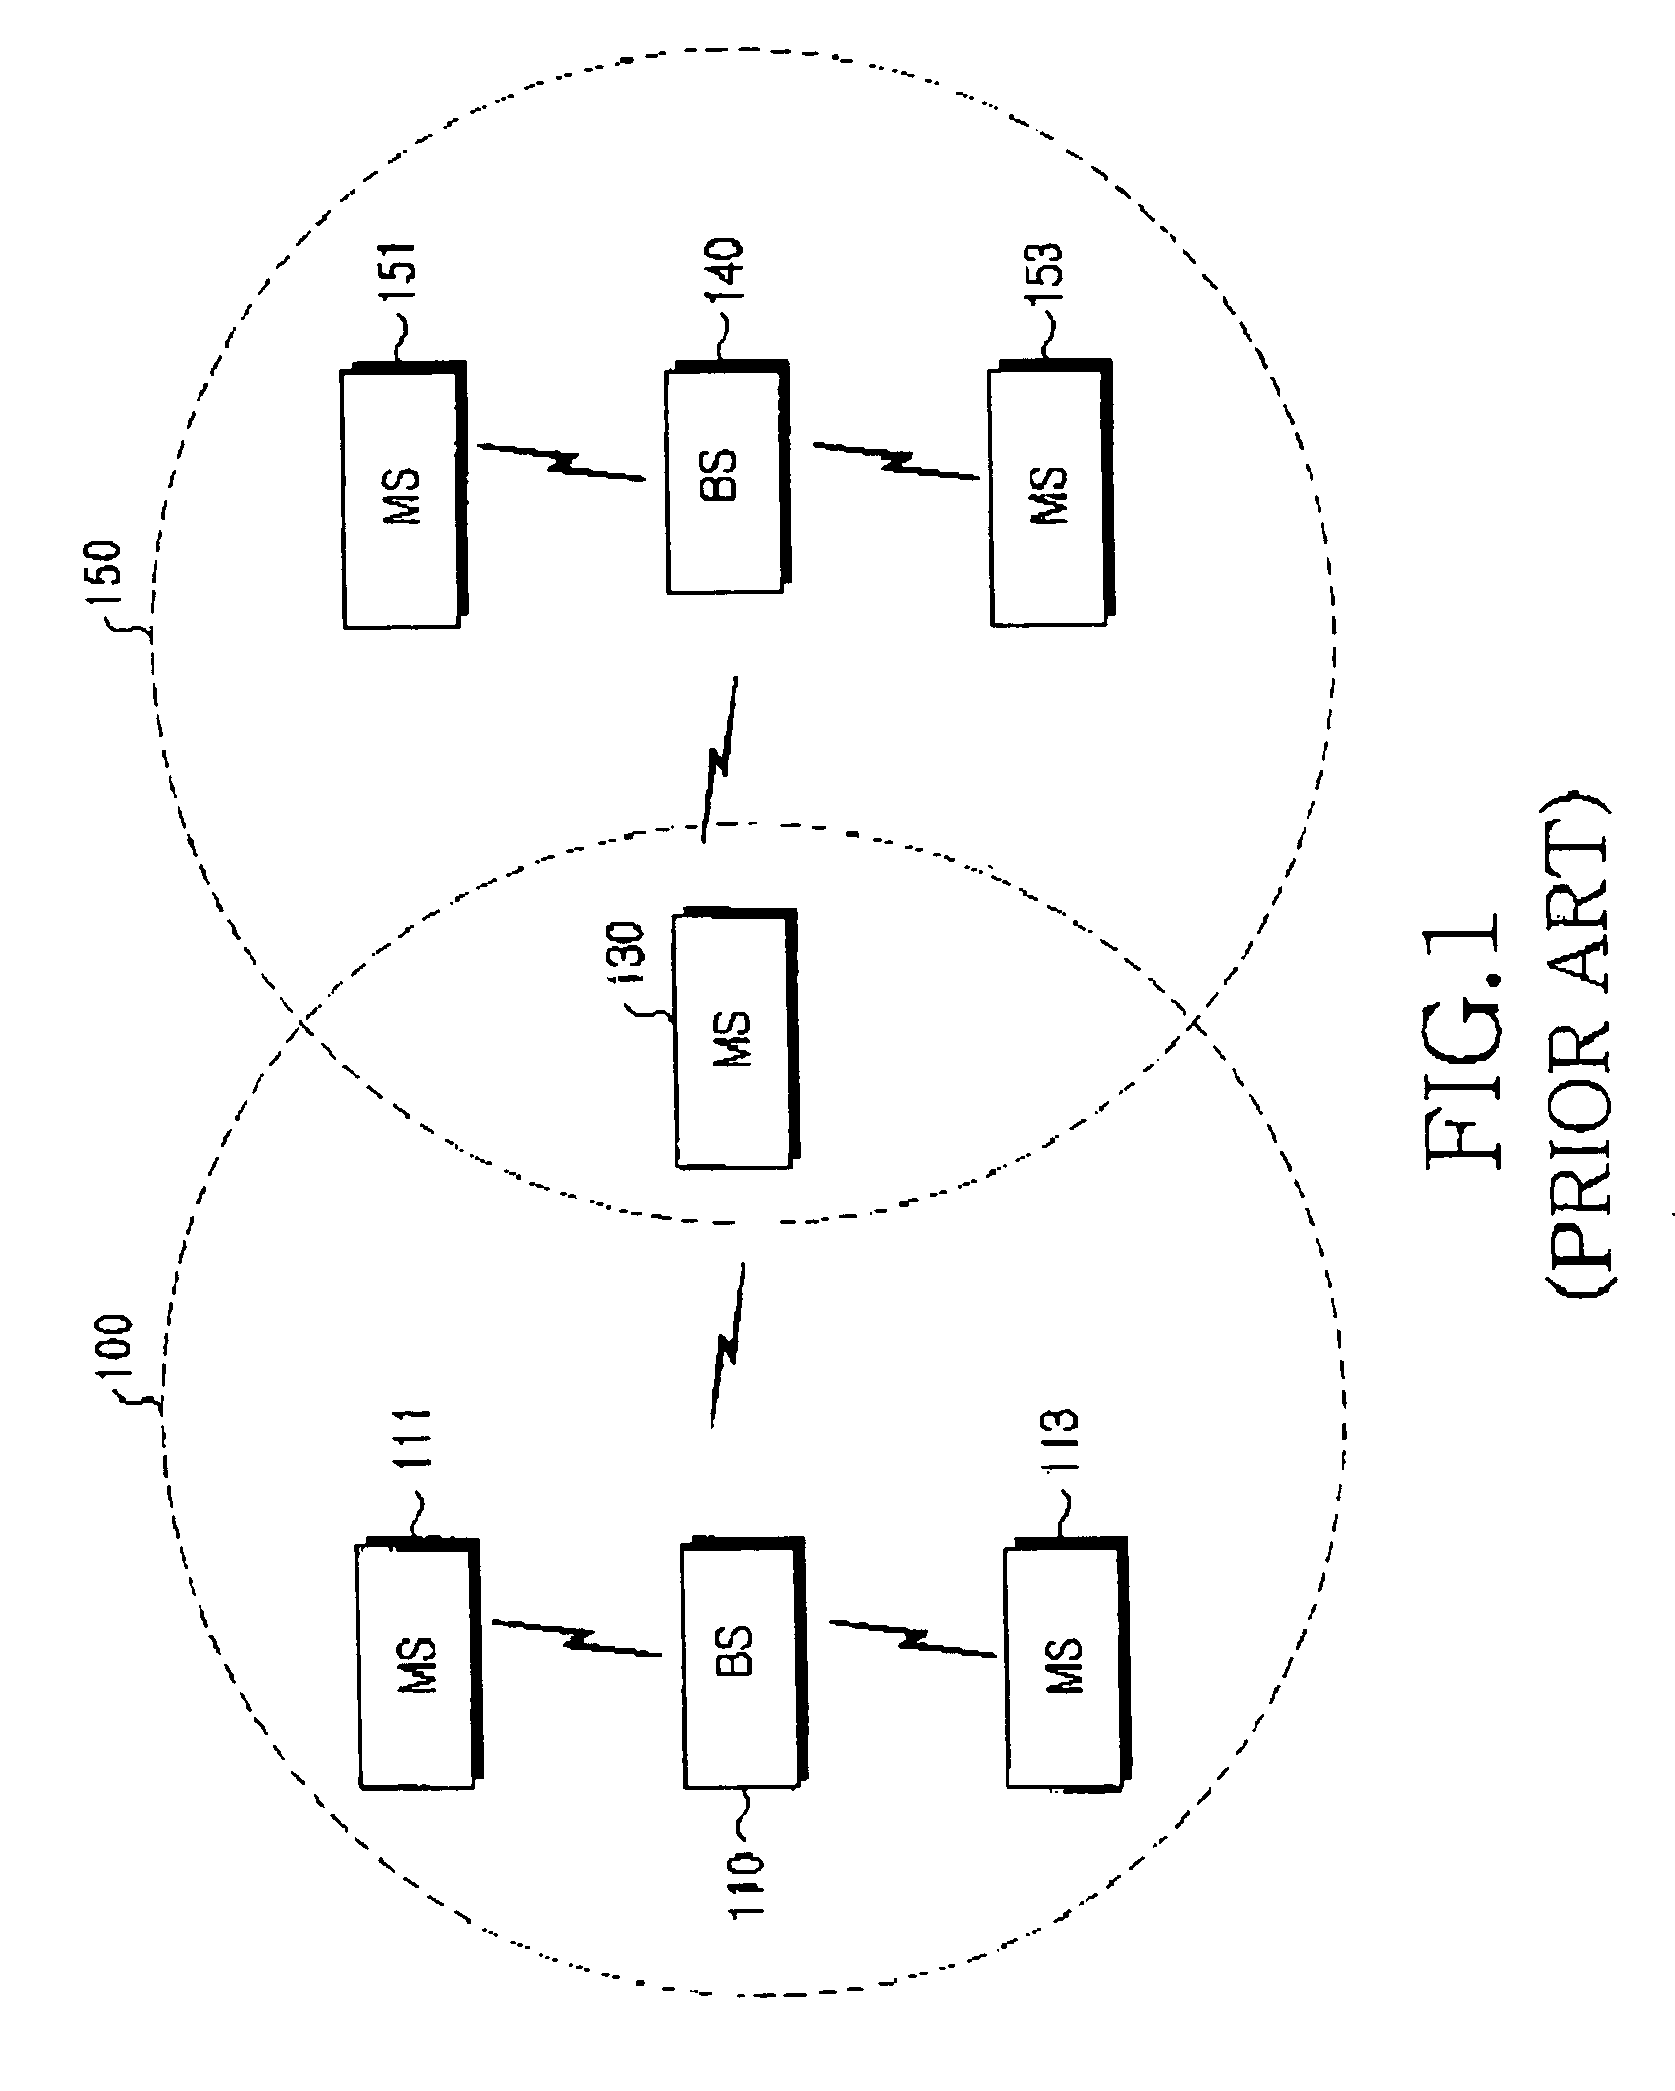 System and method for performing handover in a wireless mobile communication system